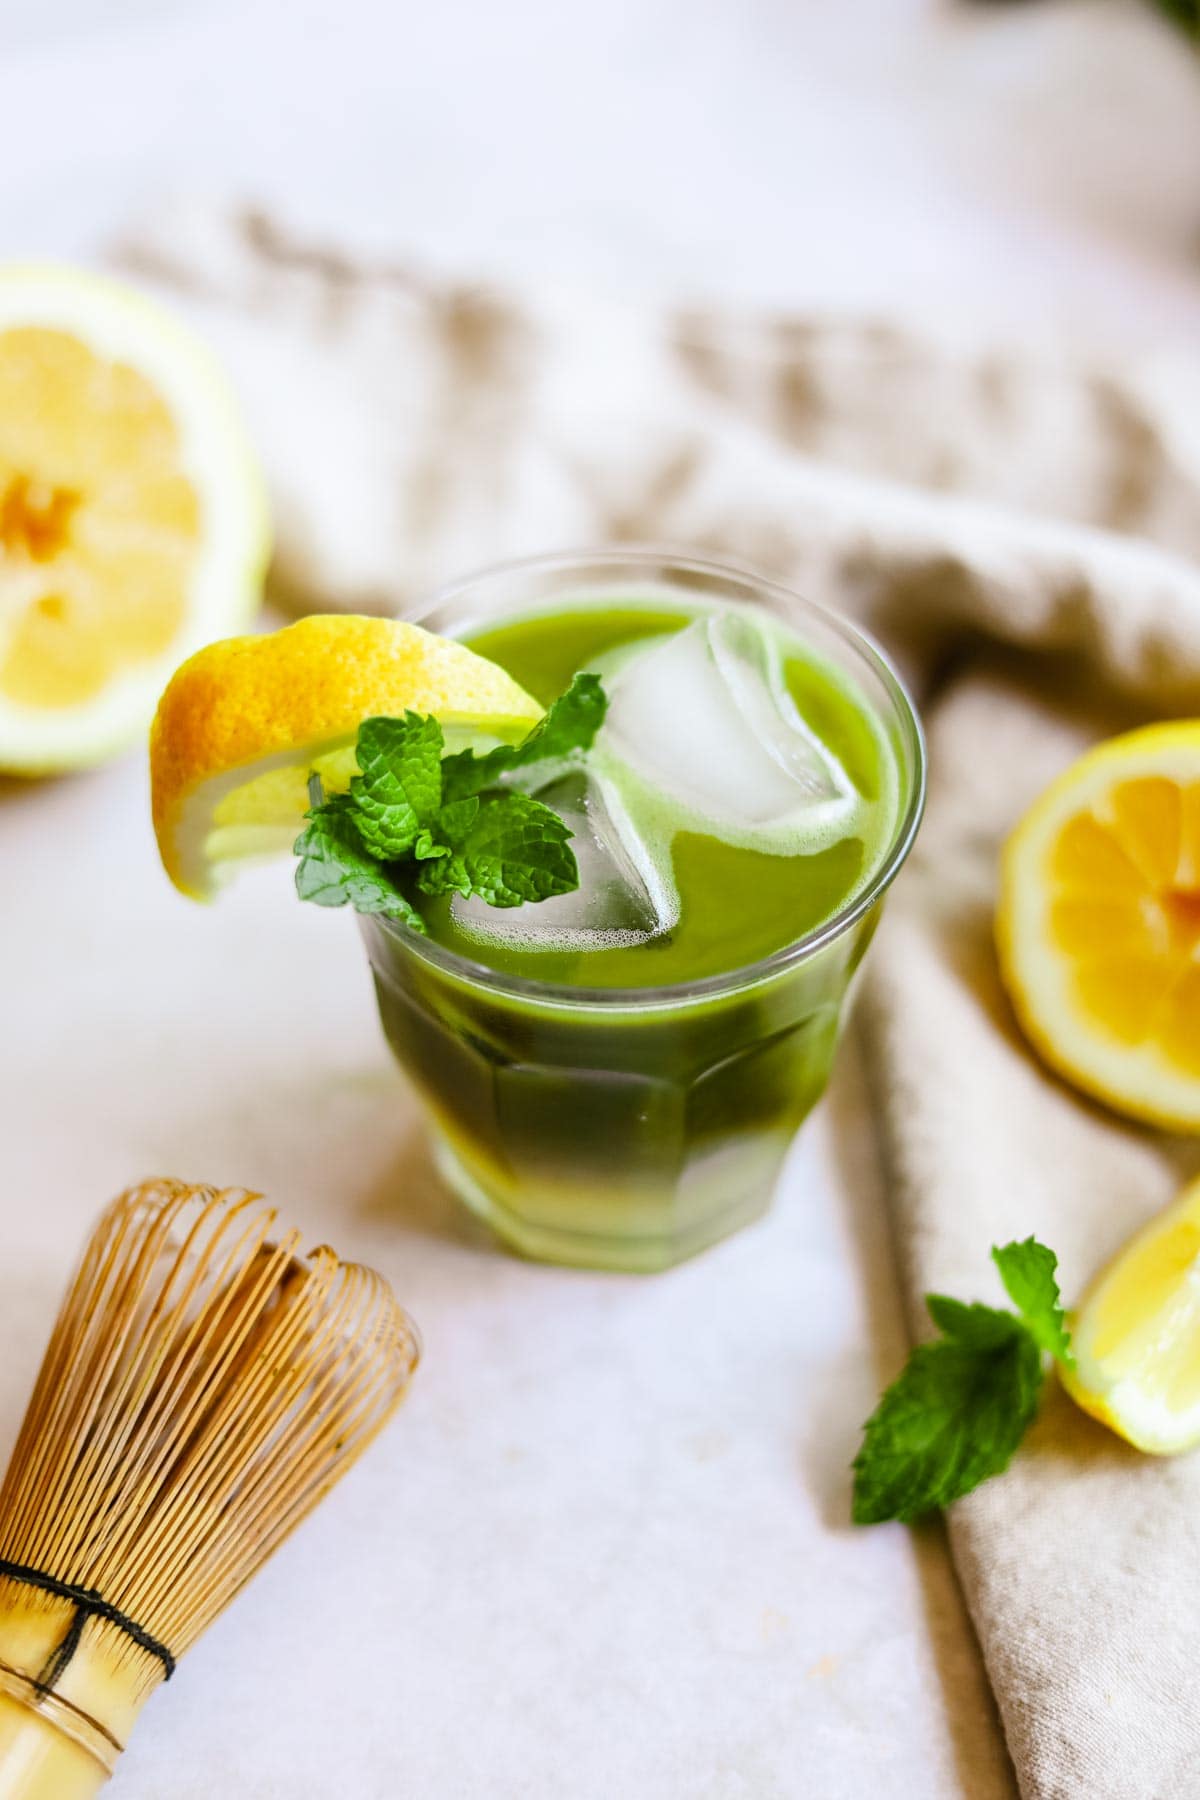 Green tea matcha lemonade in a glass with a lemon wedge and sprig of mint.